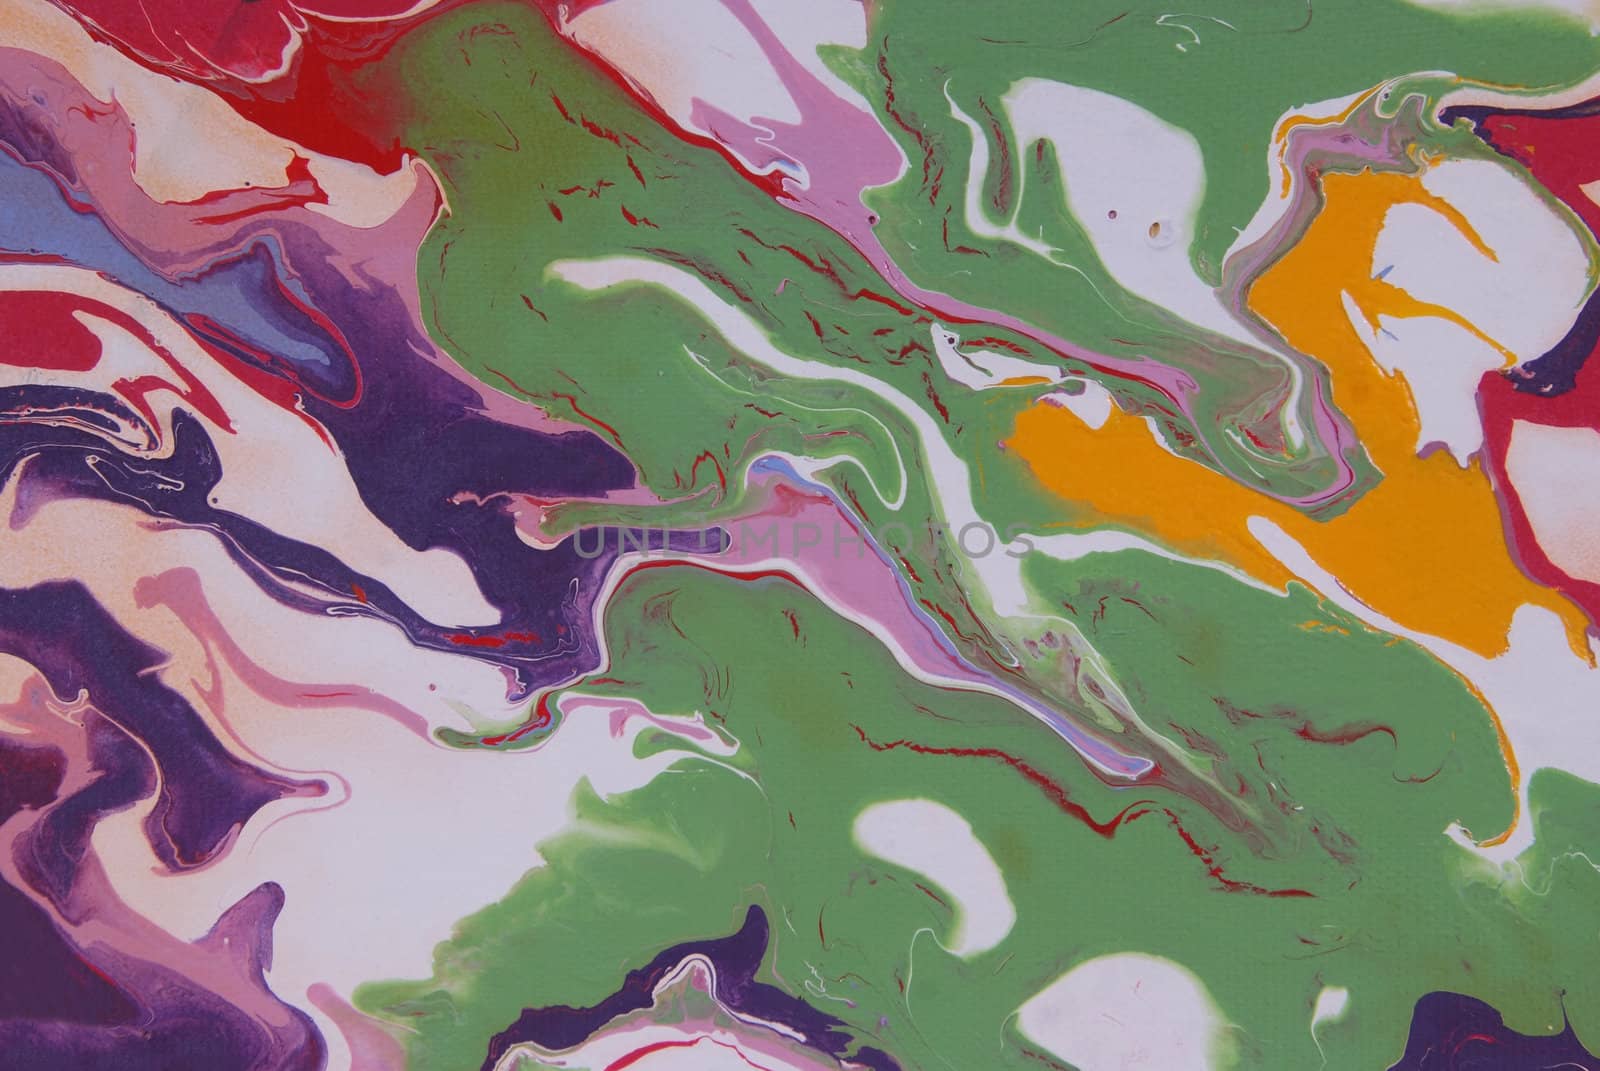 A bright, colorful abstract background created by wet paints mixing on a rotating canvas.